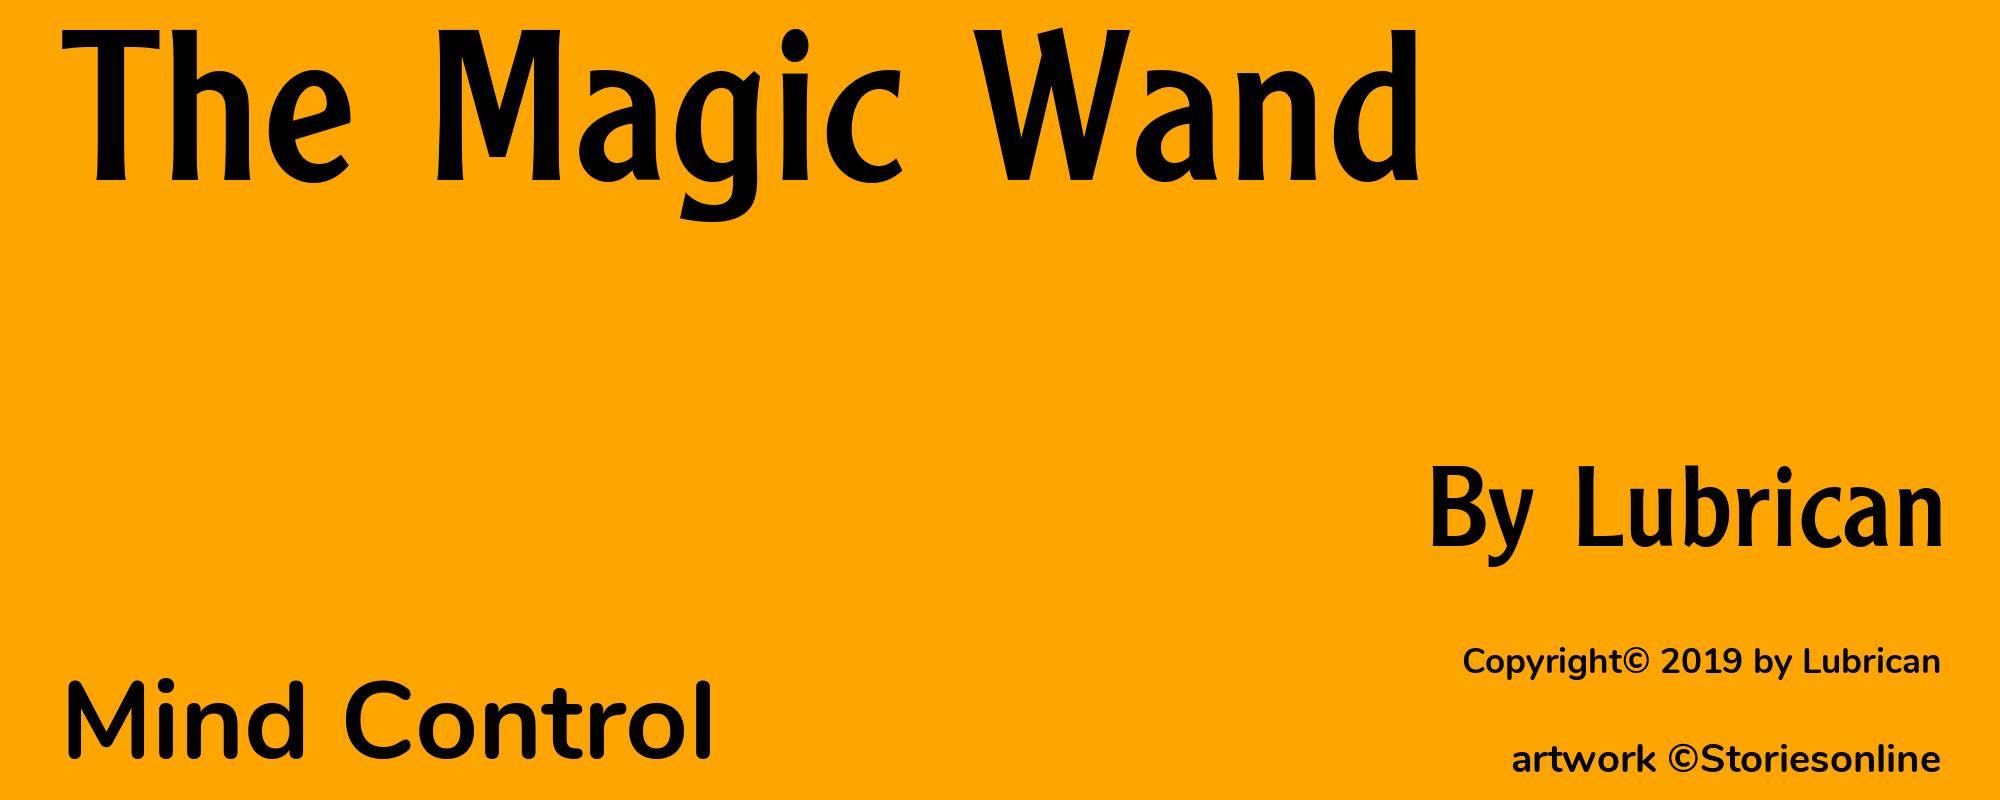 The Magic Wand - Cover